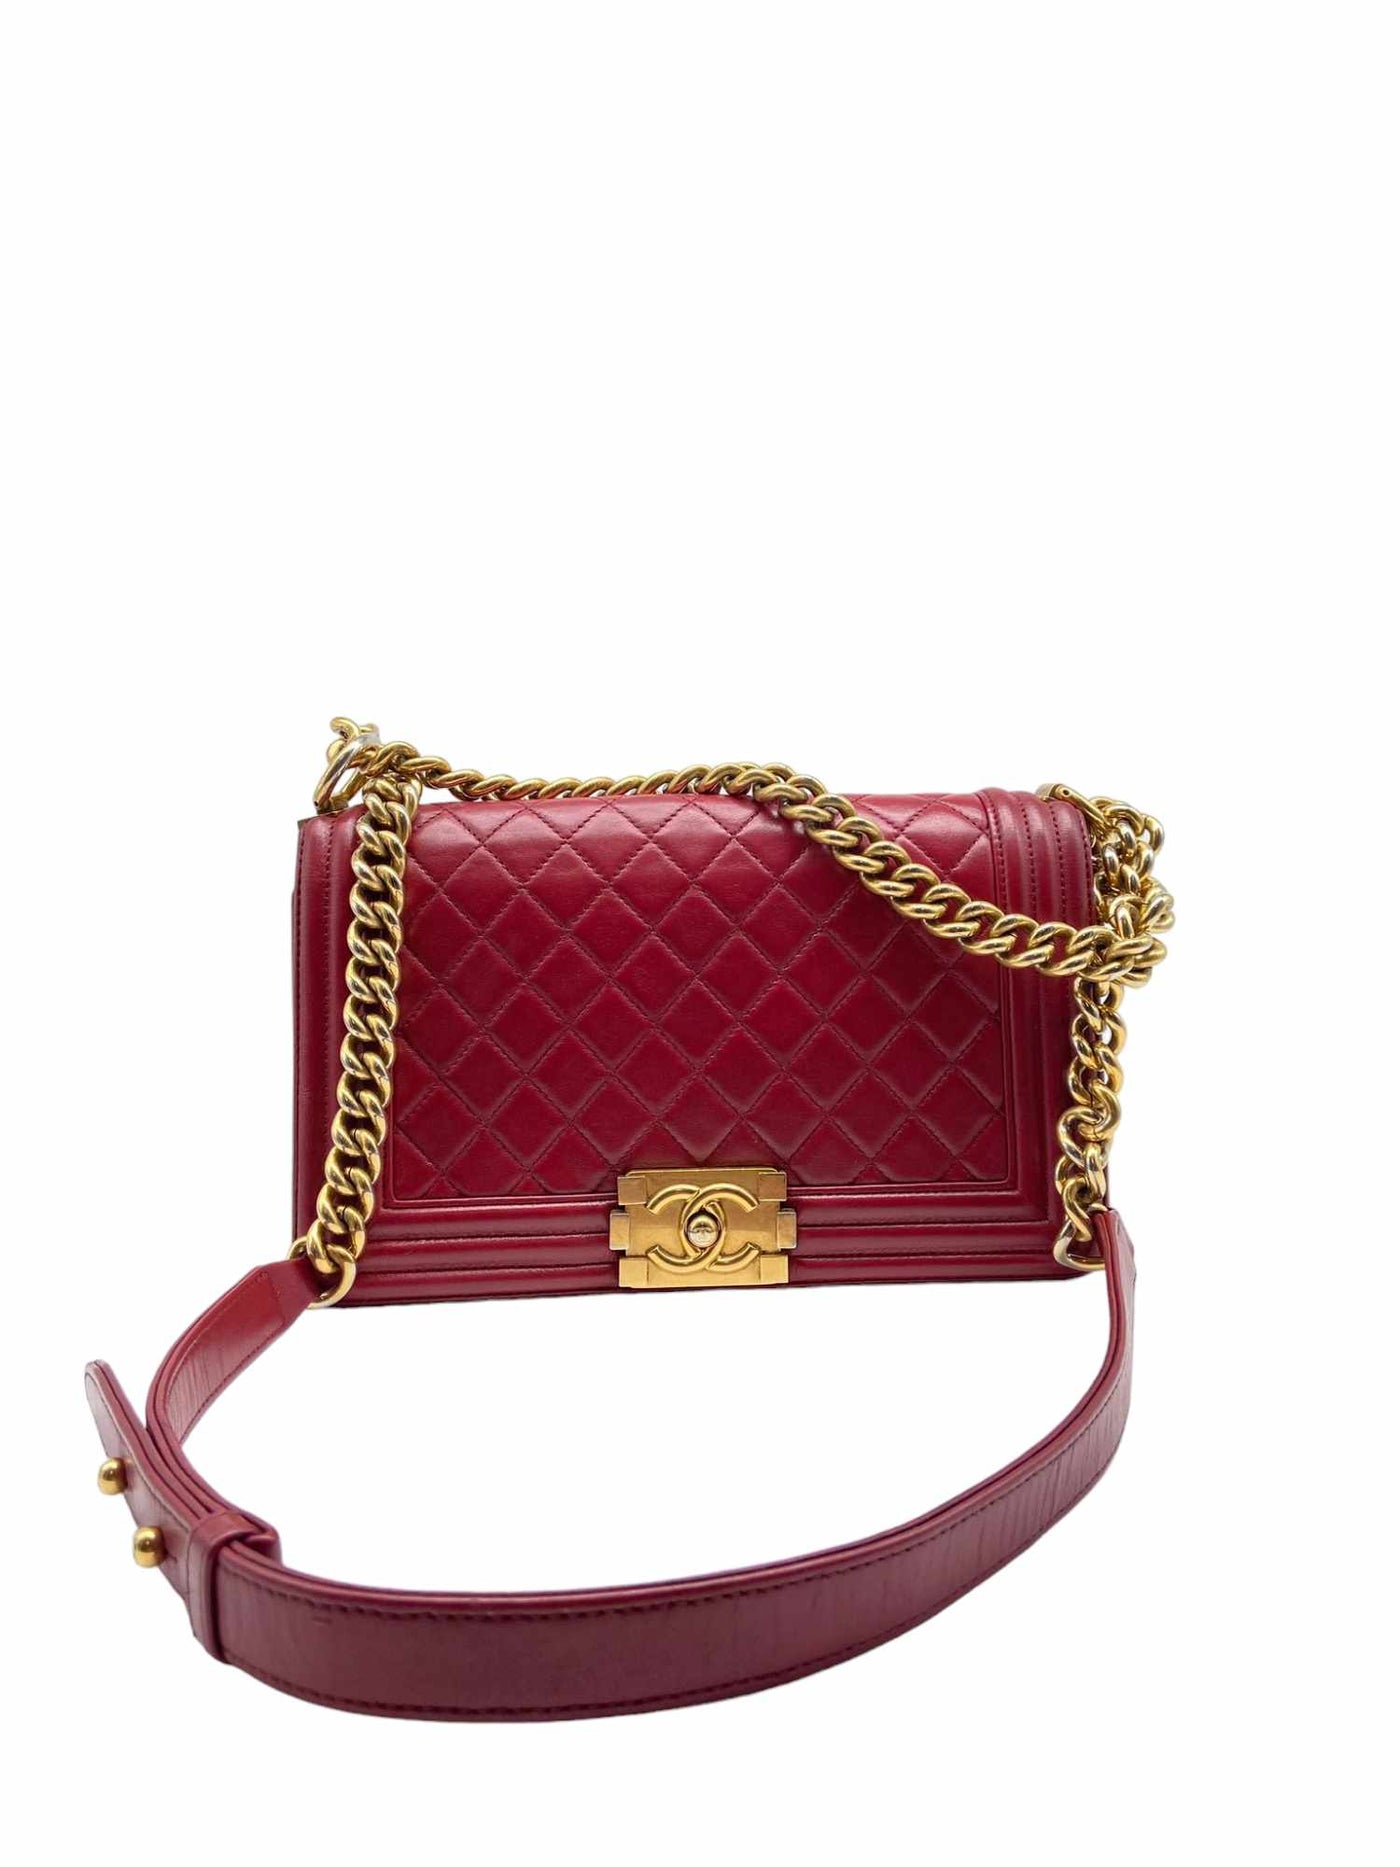 Chanel Boy  Burgundy Flap Bag Quilted Lambskin